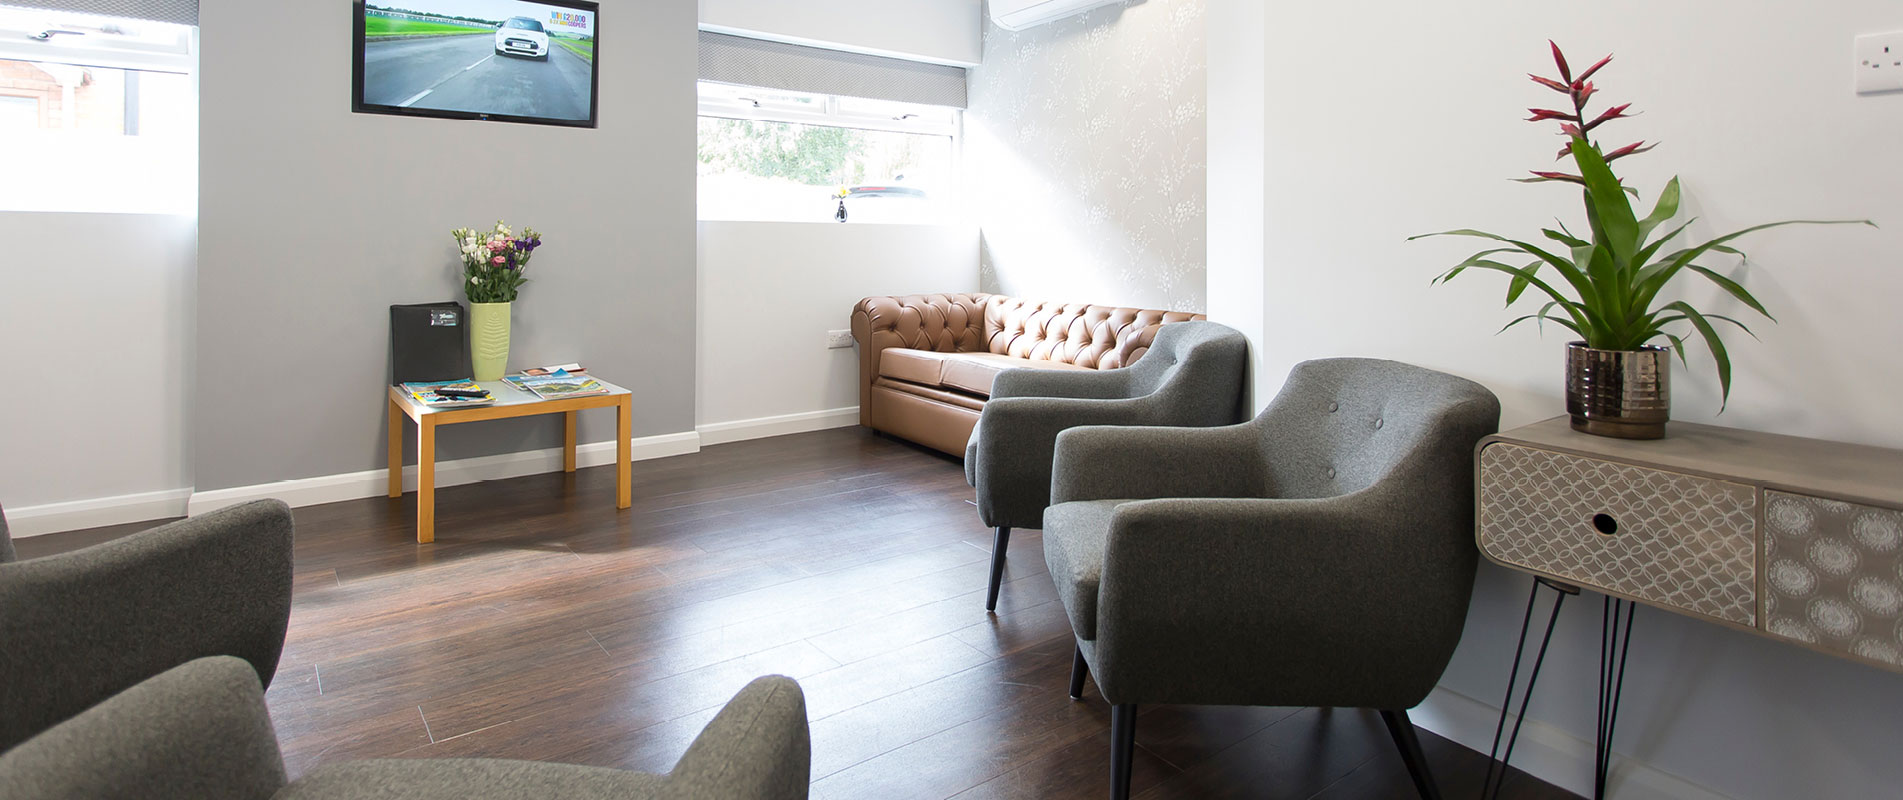 76 Dental - private waiting room design and fit out